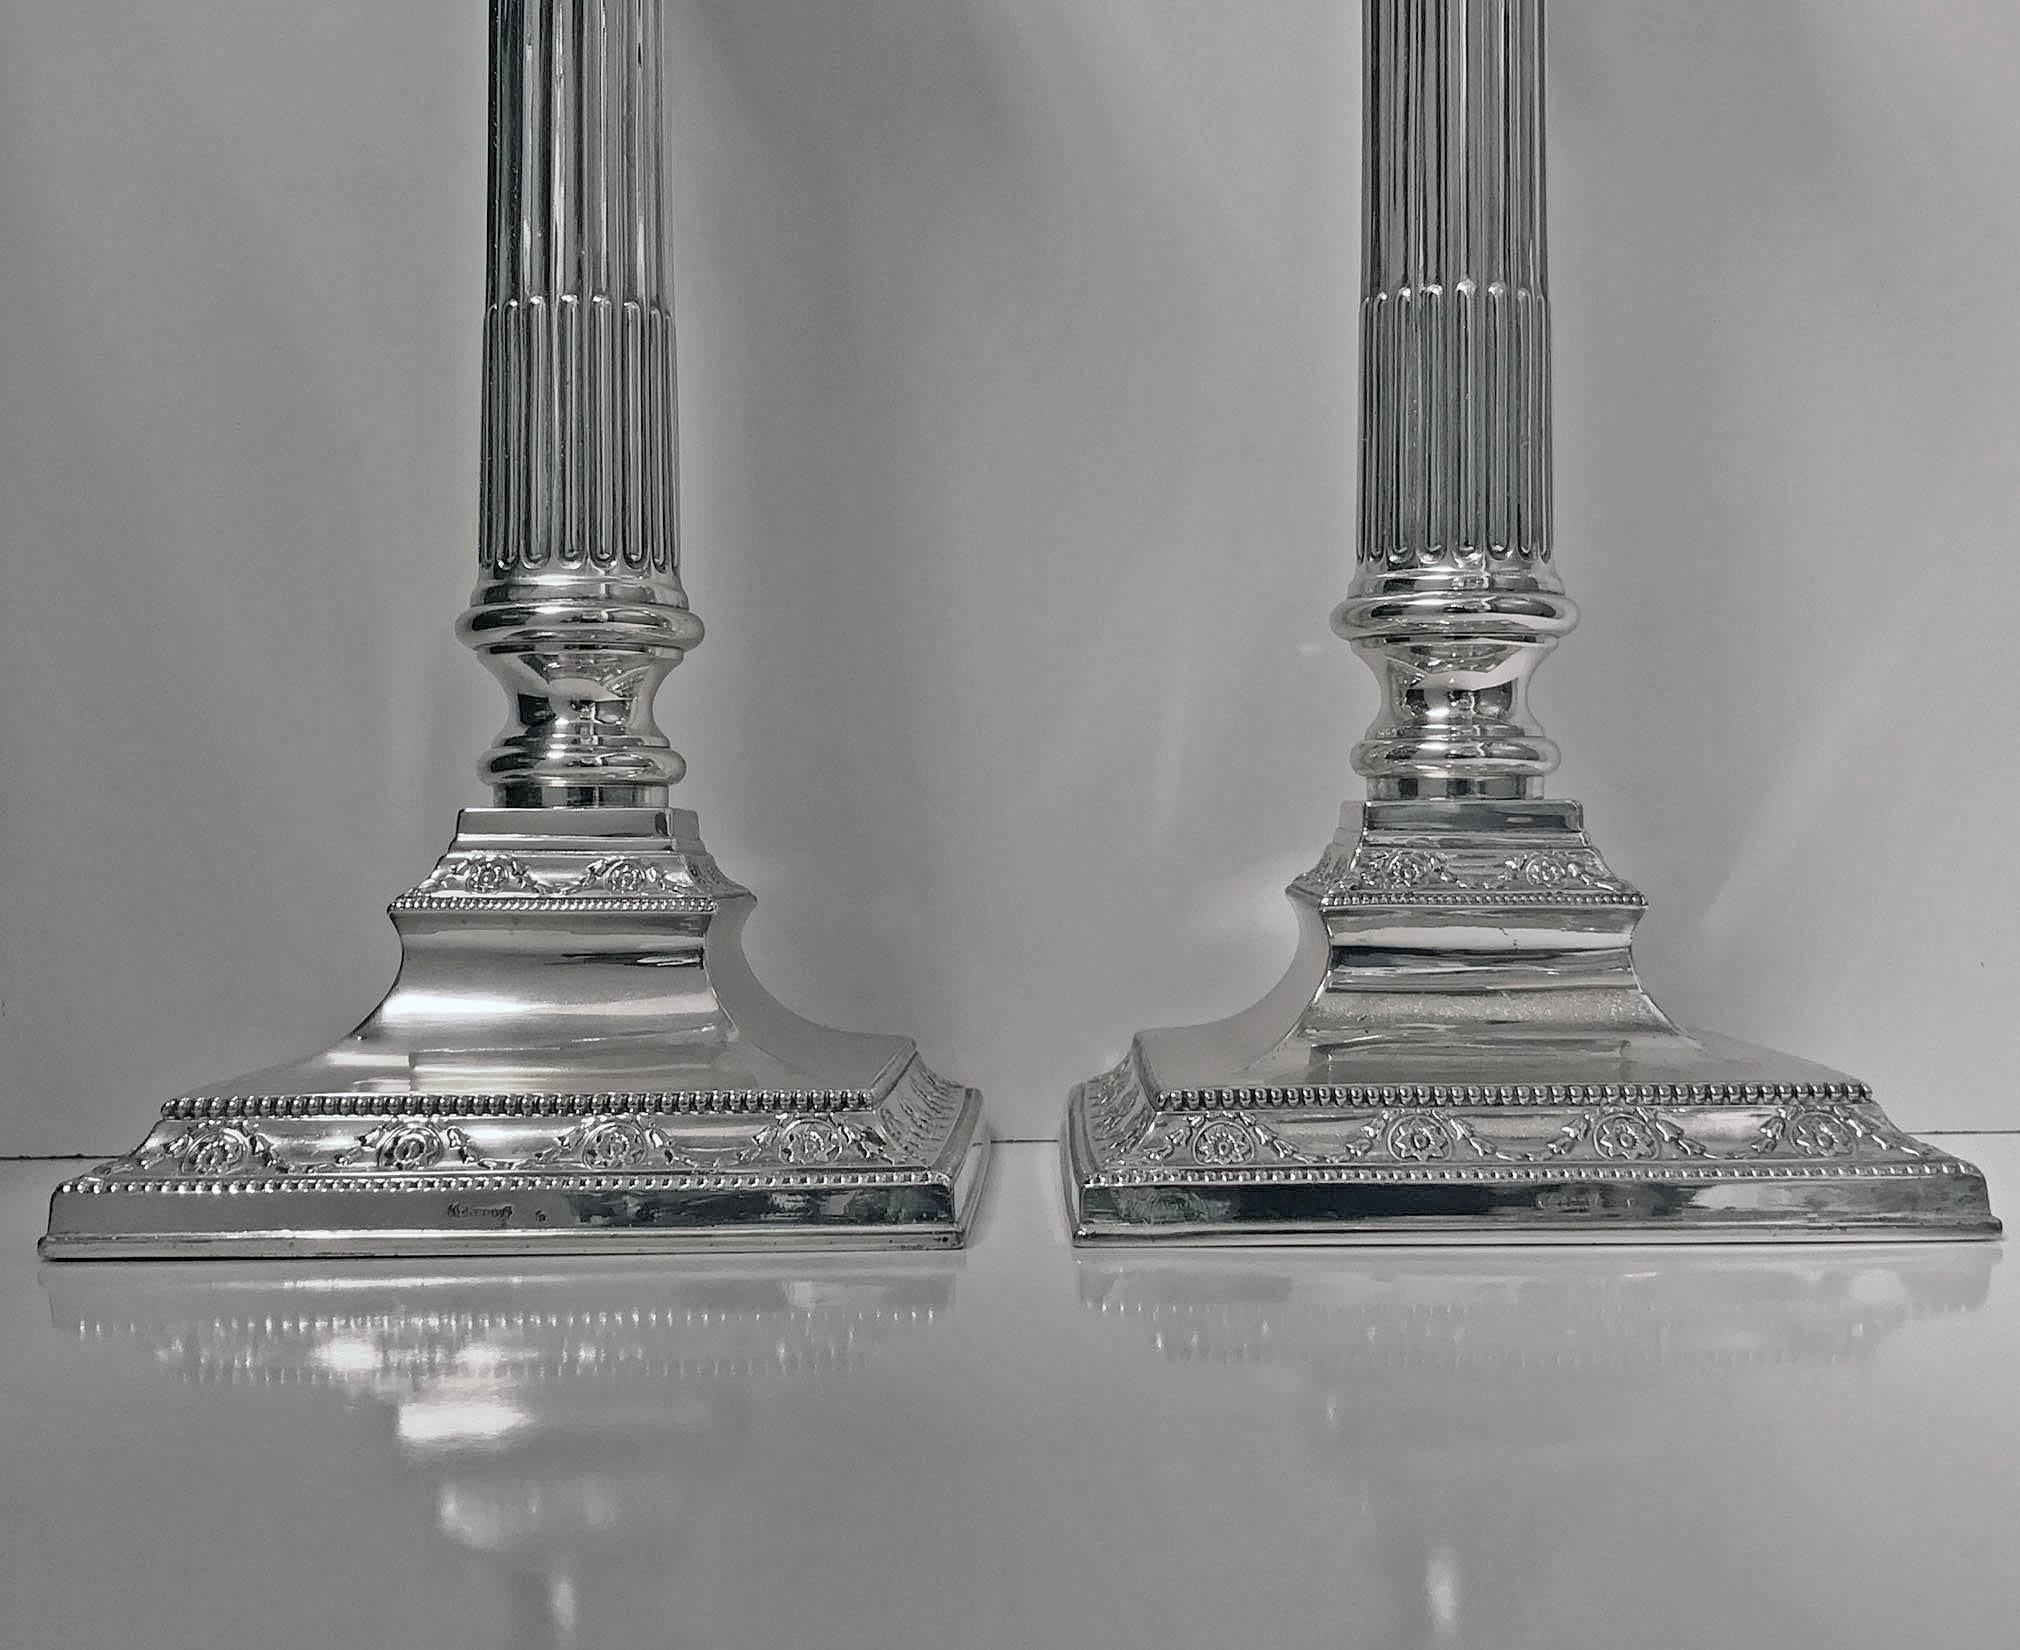 Pair of Antique Silver Candlesticks, Germany, circa 1900, H. Meyen & Co. The candlesticks of Corinthian column-form with bead festoon garland borders, column stems, and removable bead nozzles. Measure: Height 12.5 inches. Total weight 774 grams.